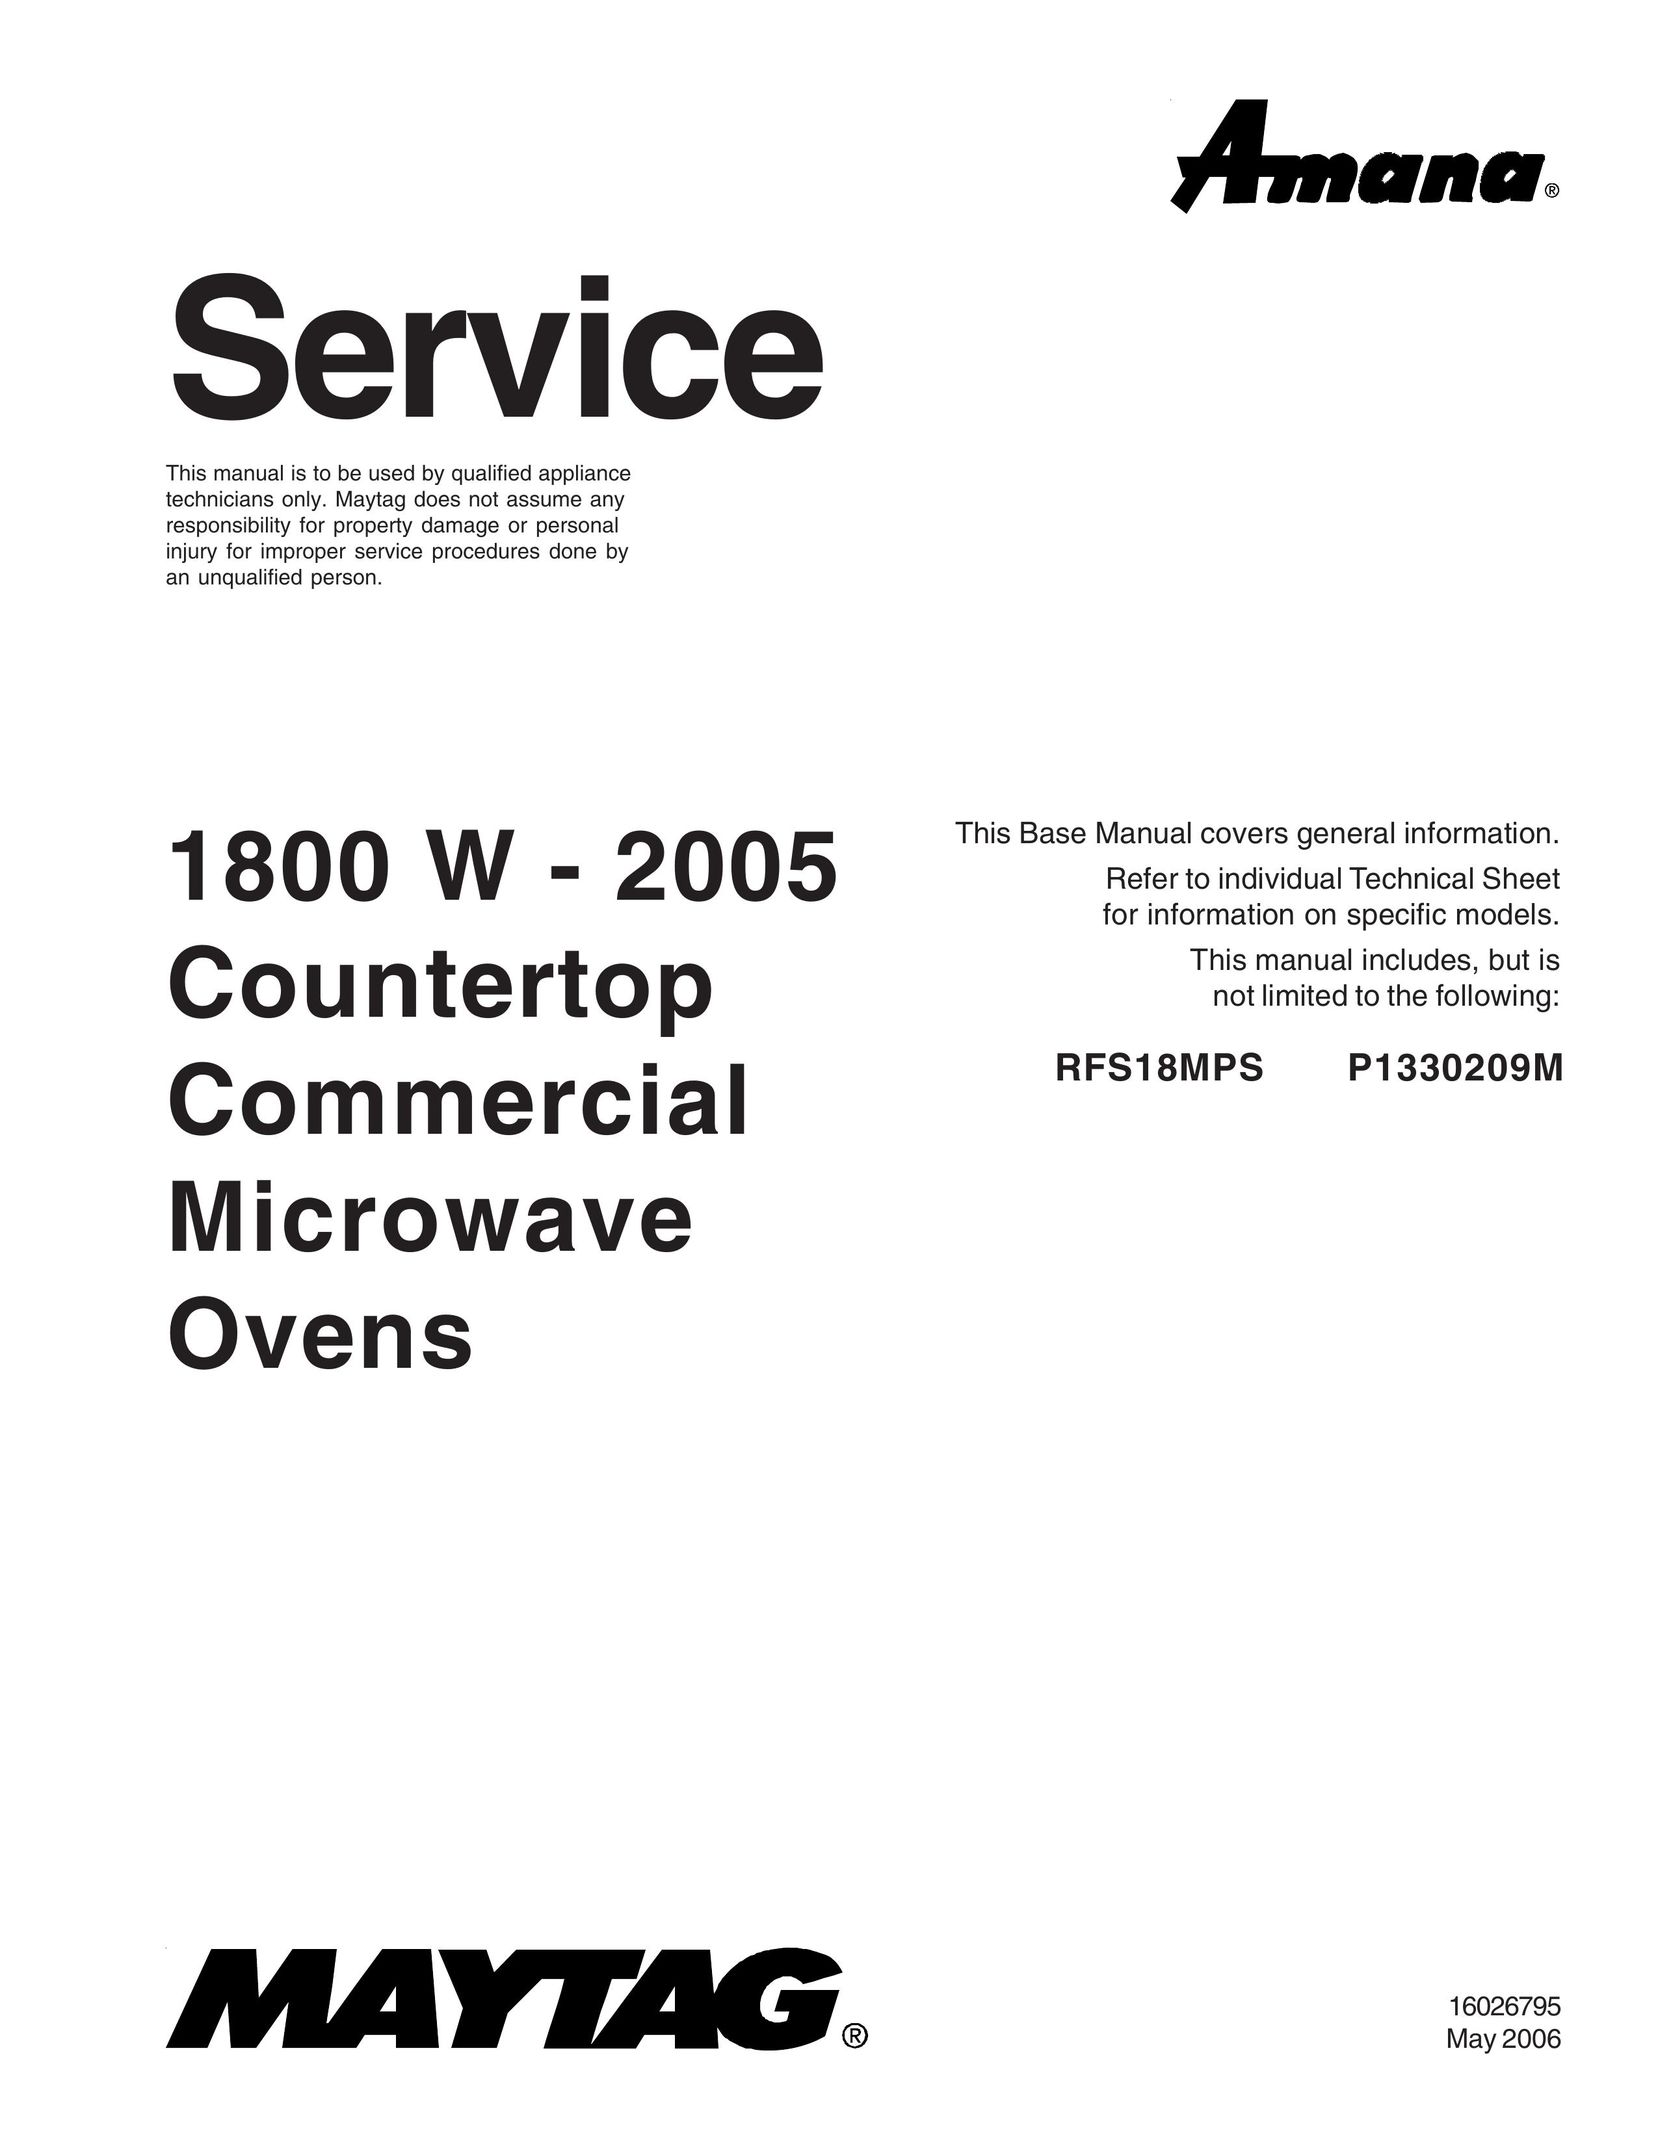 Maytag 1800 W - 2005 Microwave Oven User Manual